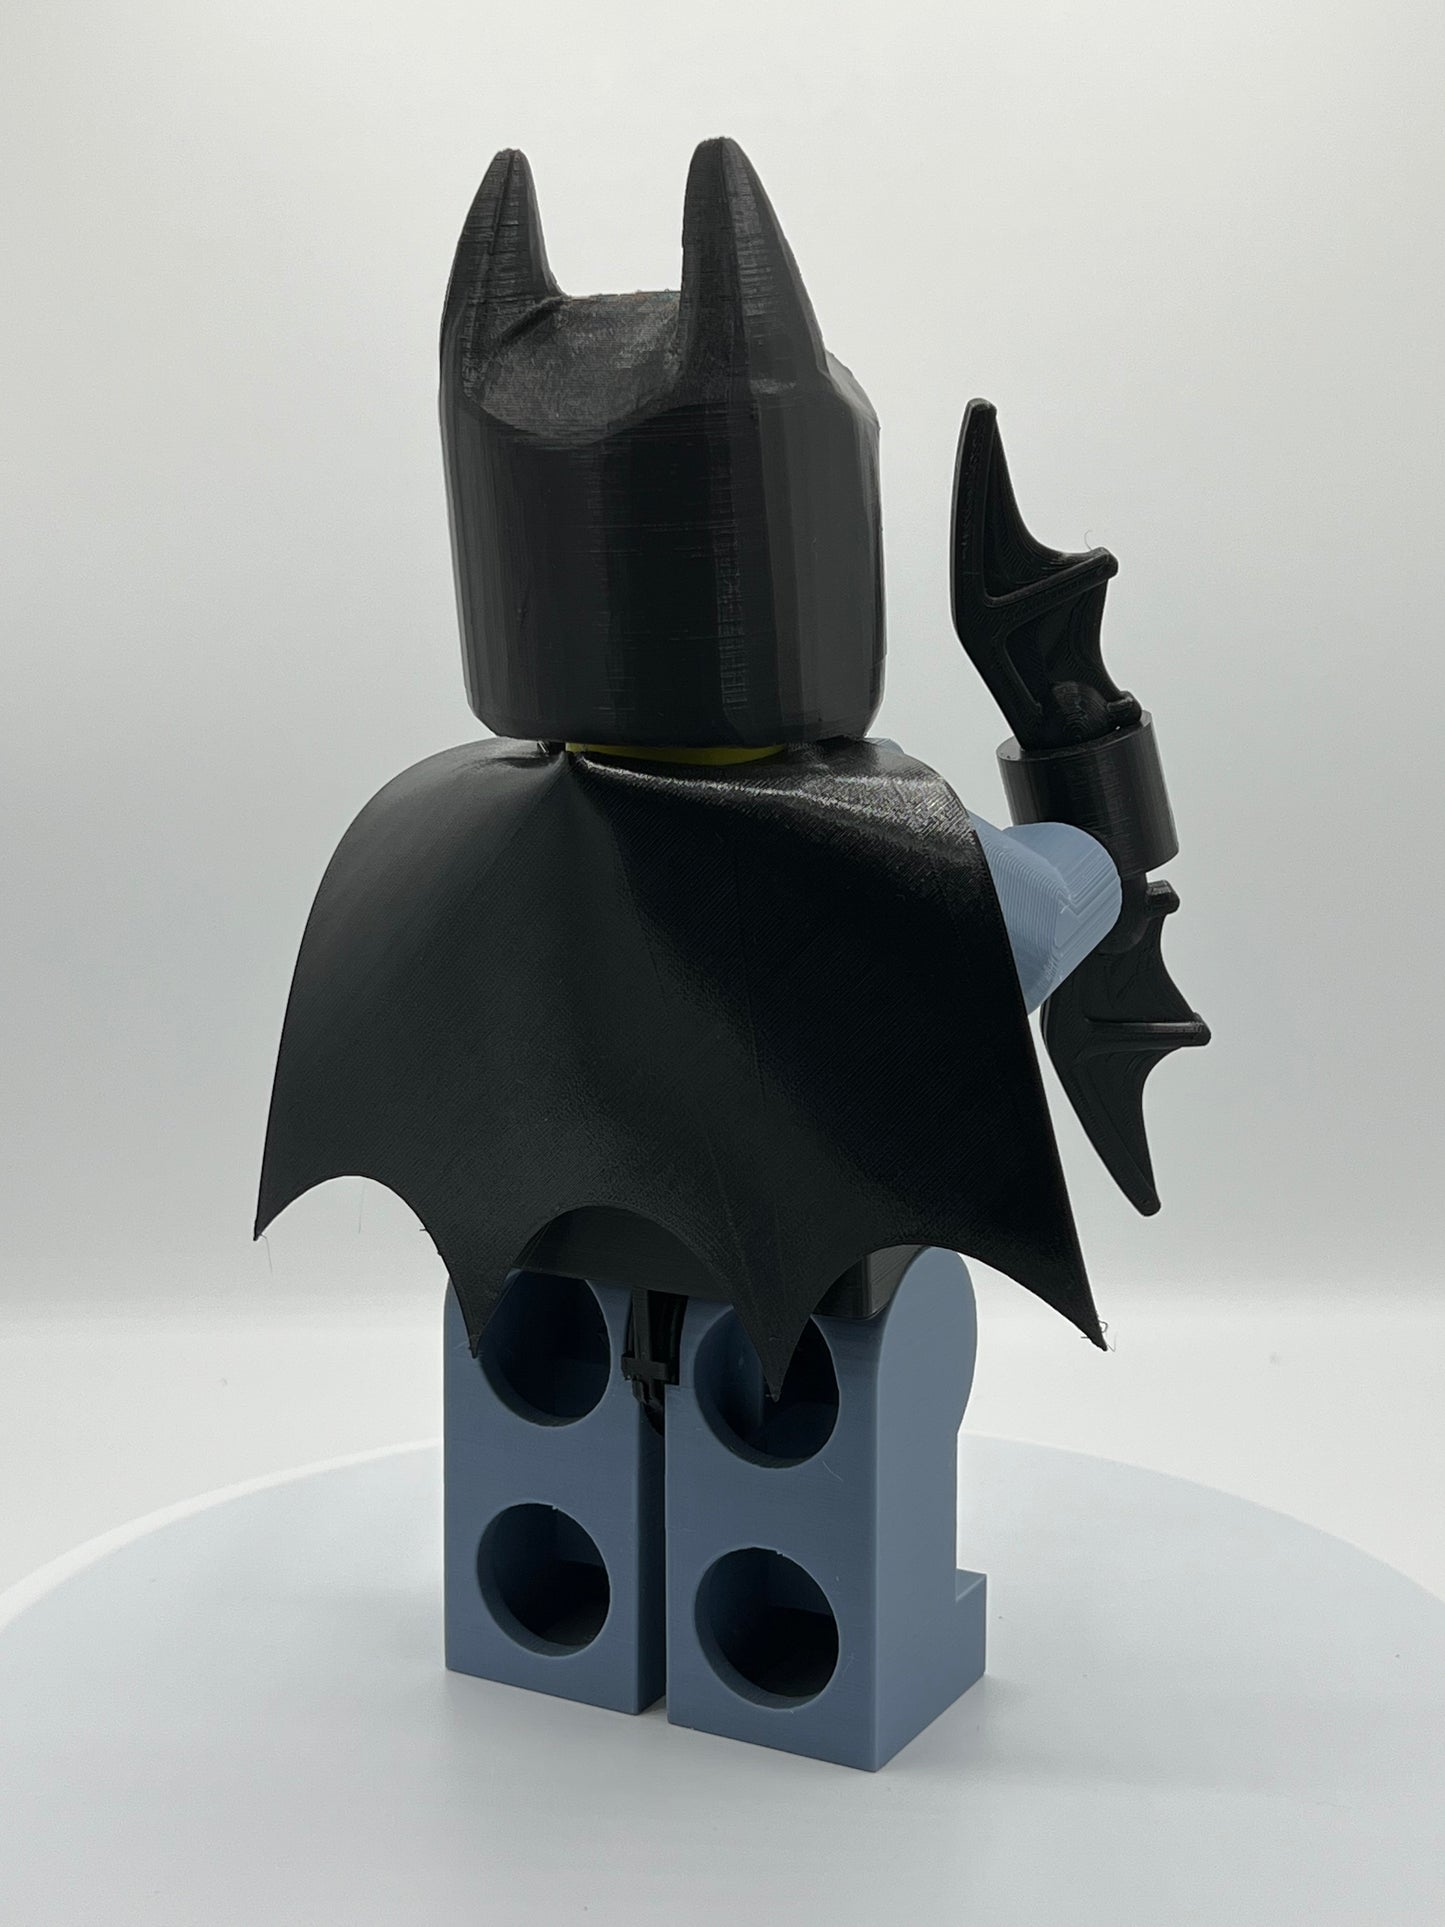 The Guardian of Gotham City